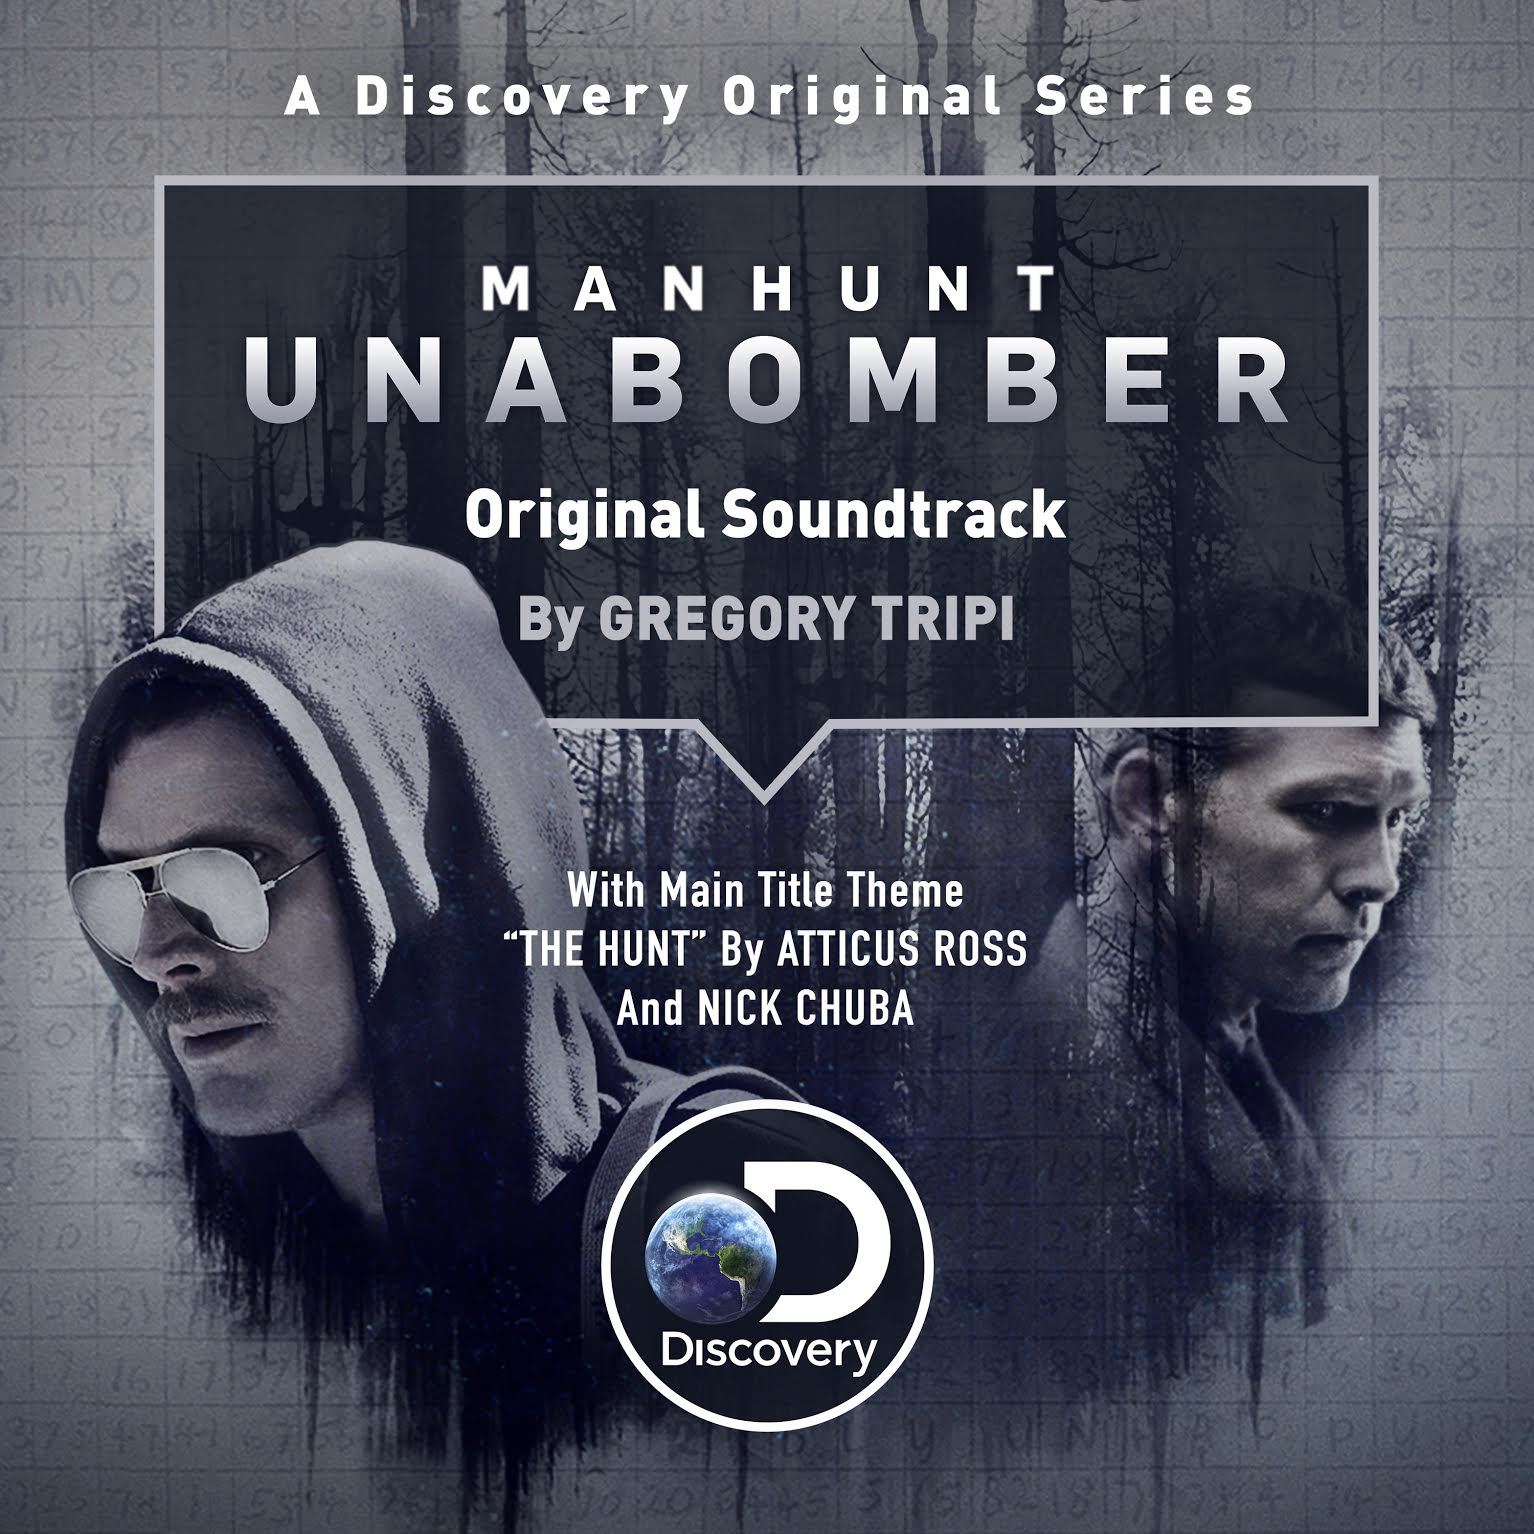 GREGORY TRIPI�S ORIGINAL SCORE FOR MANHUNT: UNABOMBER TO BE RELEASED